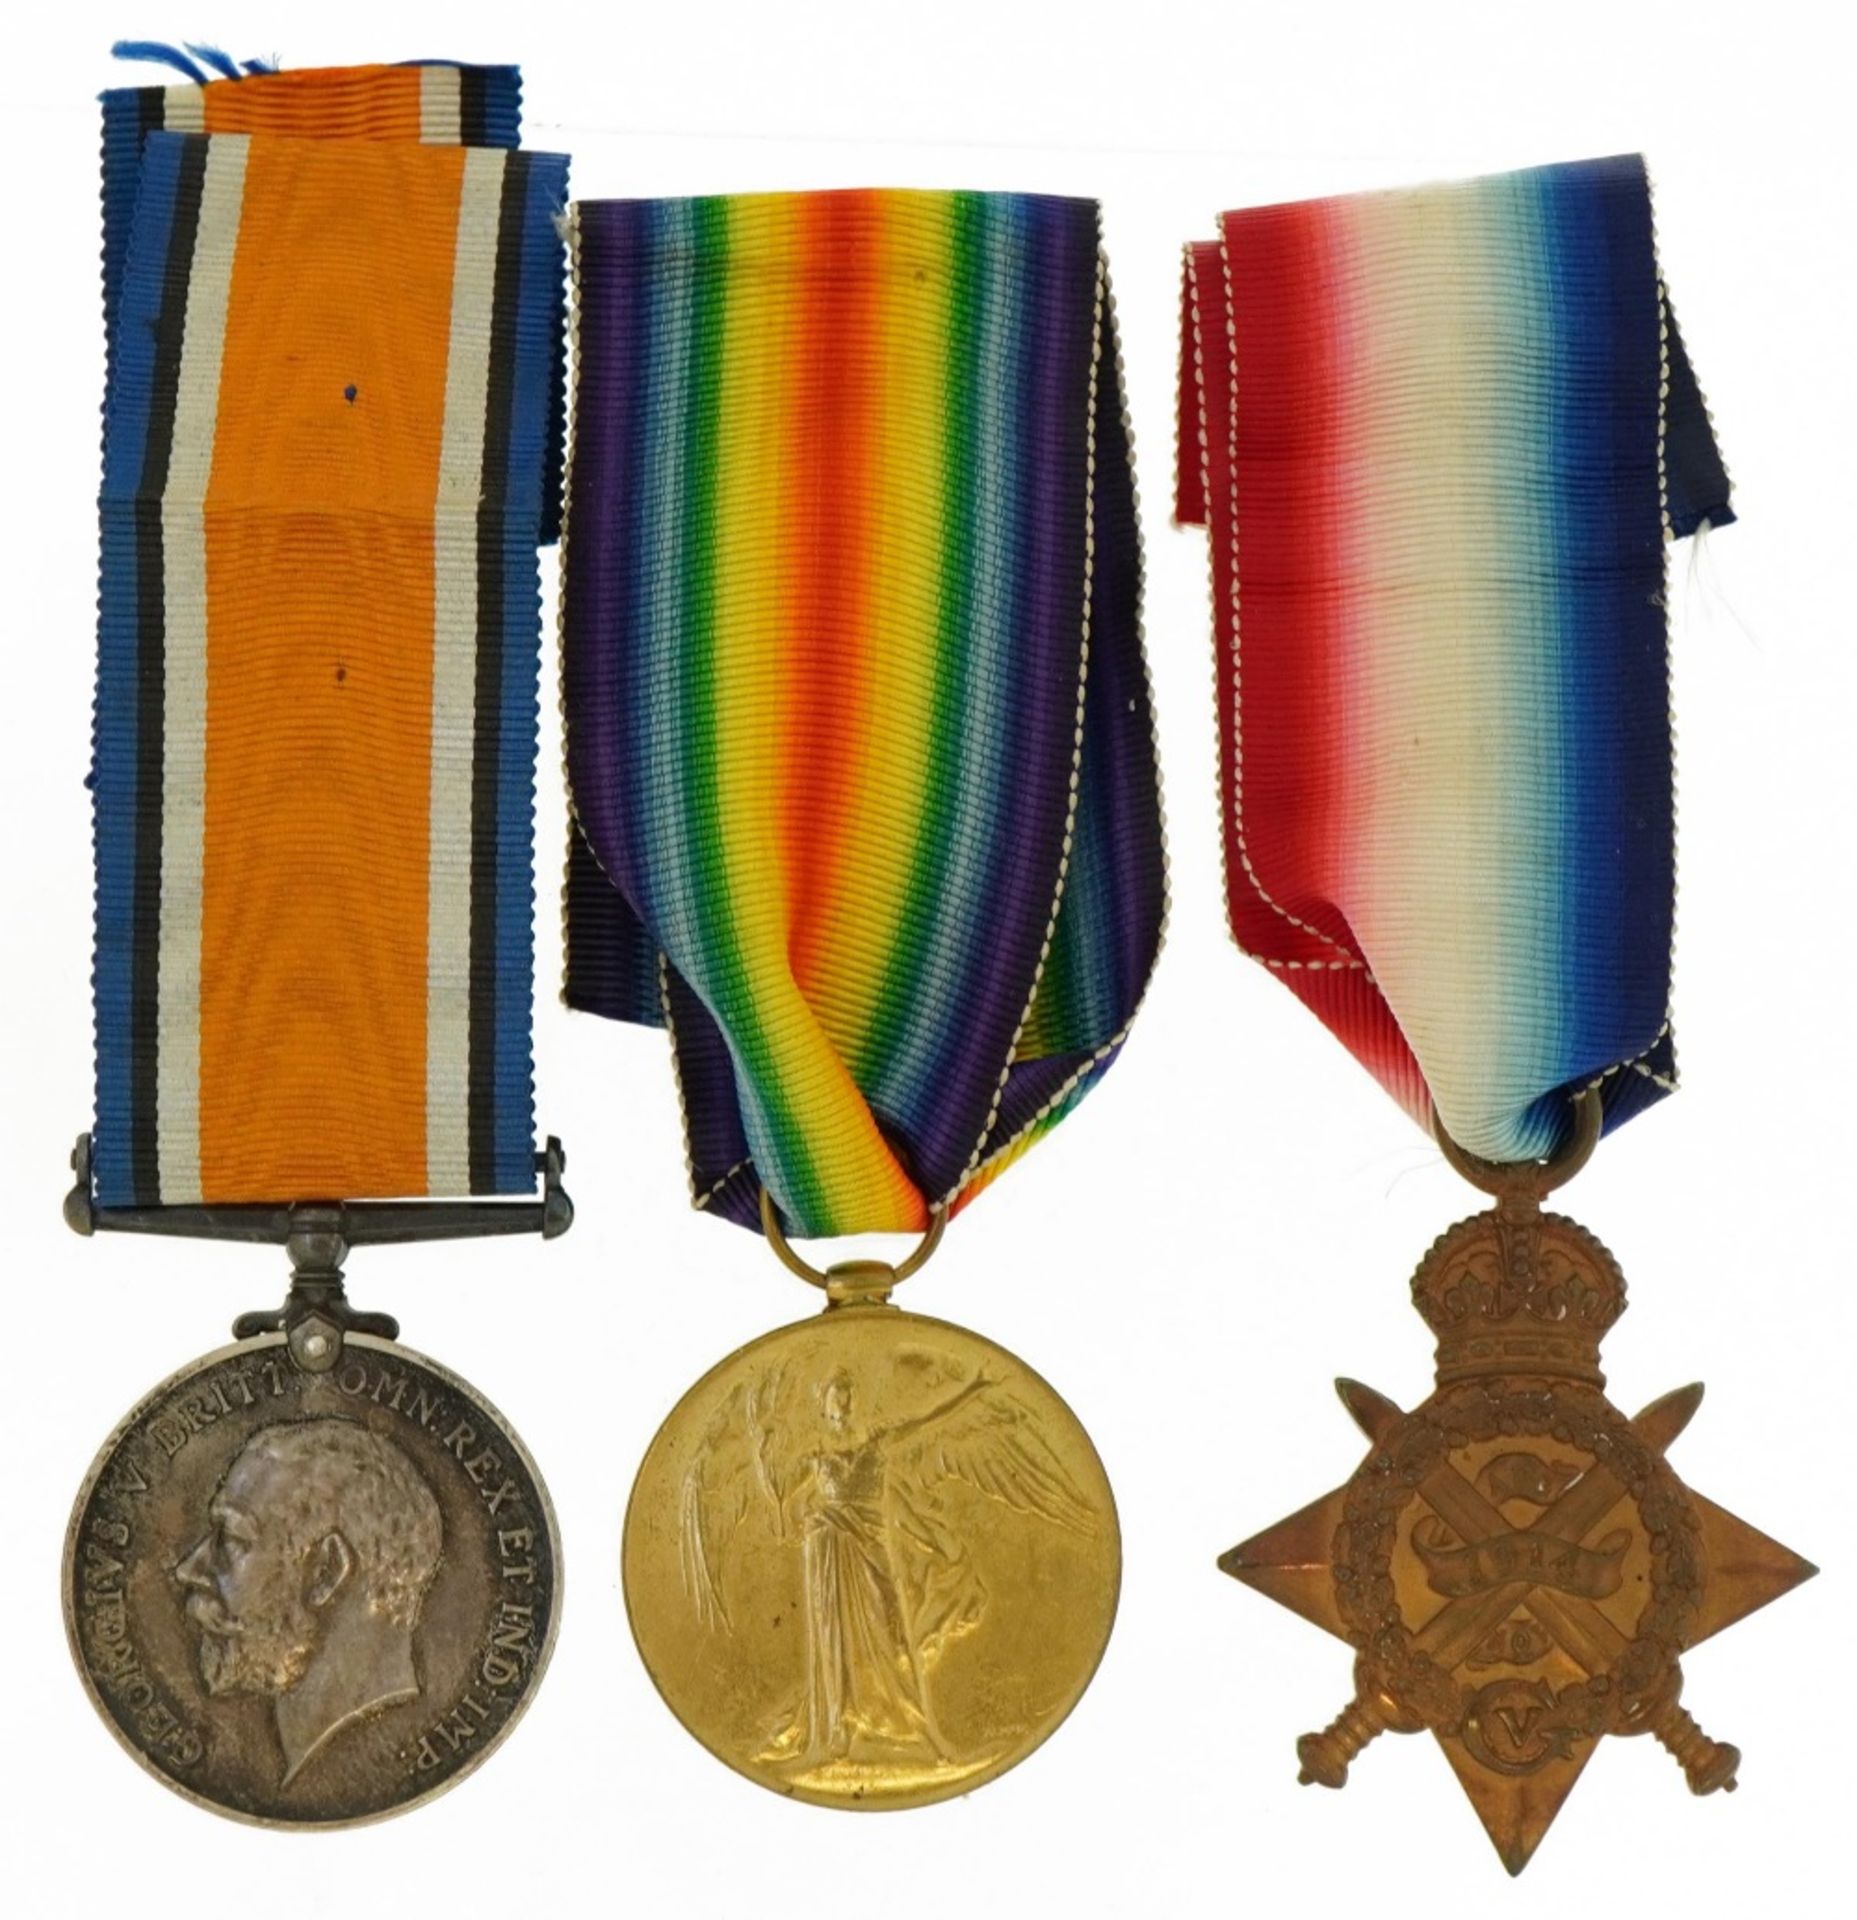 British military World War I trio with Mons star awarded to L-10013PTE.H.M.A.DYER.E.KENTR., - Image 2 of 7